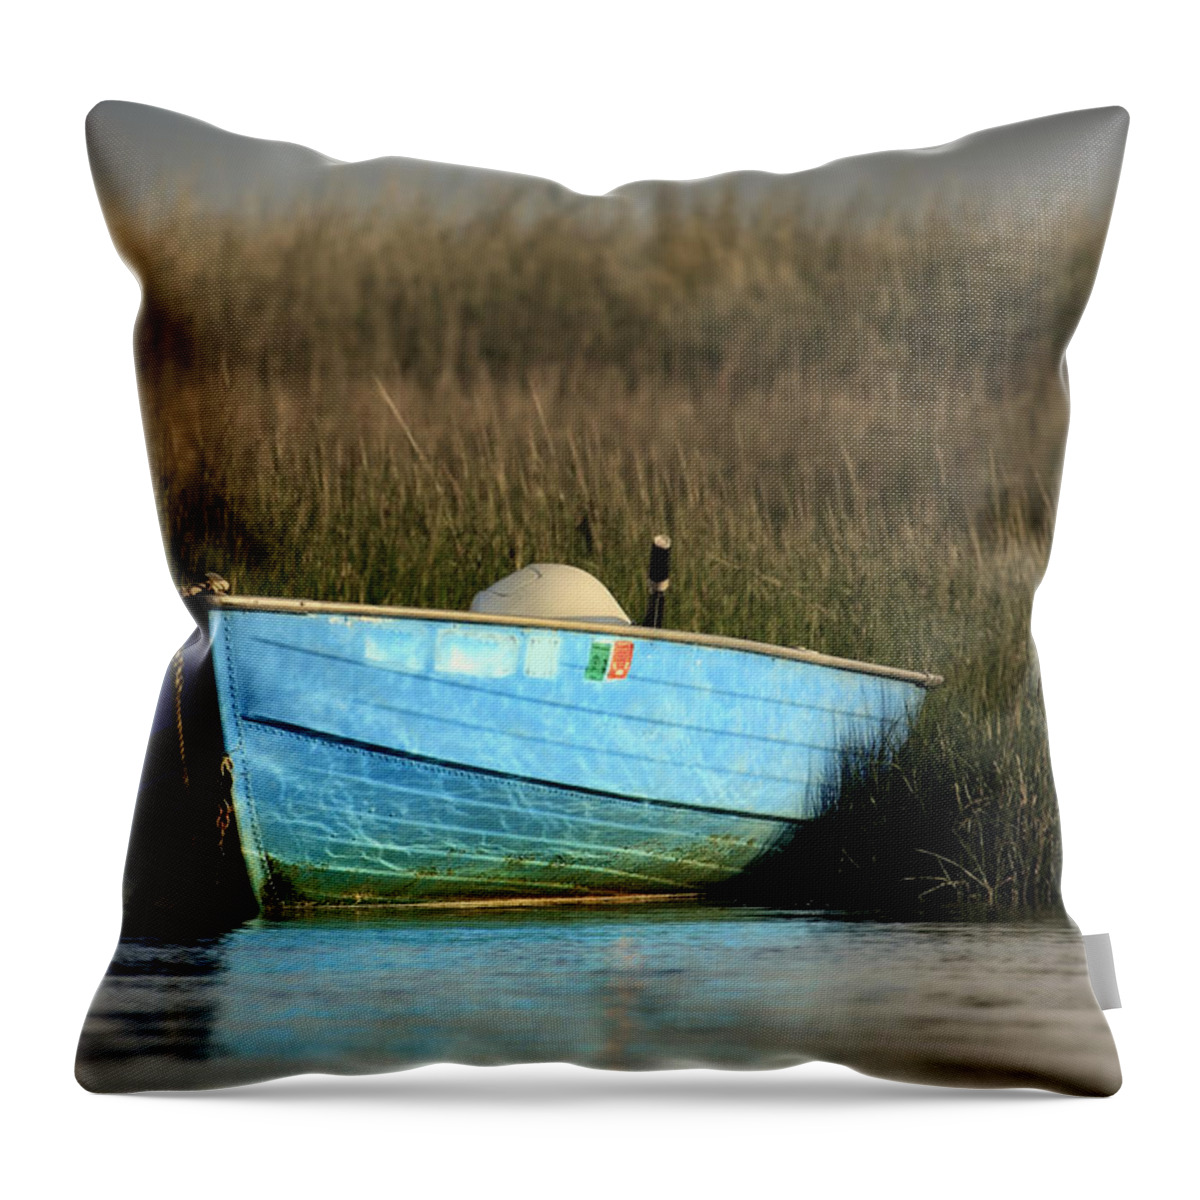 Blue Throw Pillow featuring the photograph Blue Boat Eastham Cape Cod Boat Meadow Creek by Darius Aniunas